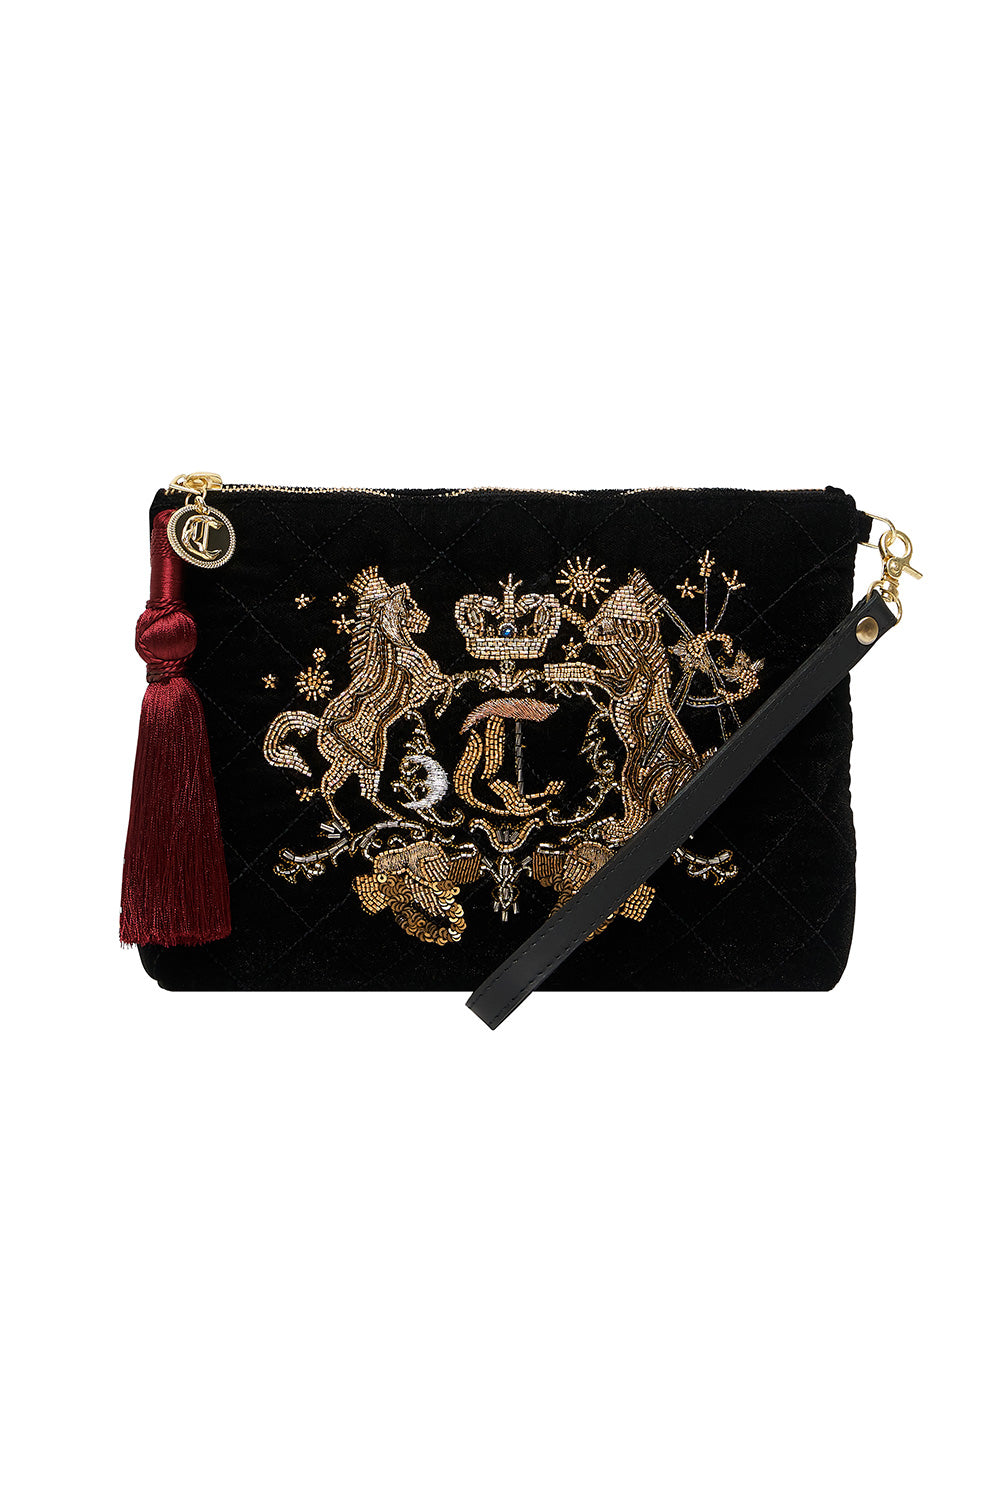 QUILTED VELVET CLUTCH DINING HALL DARLING